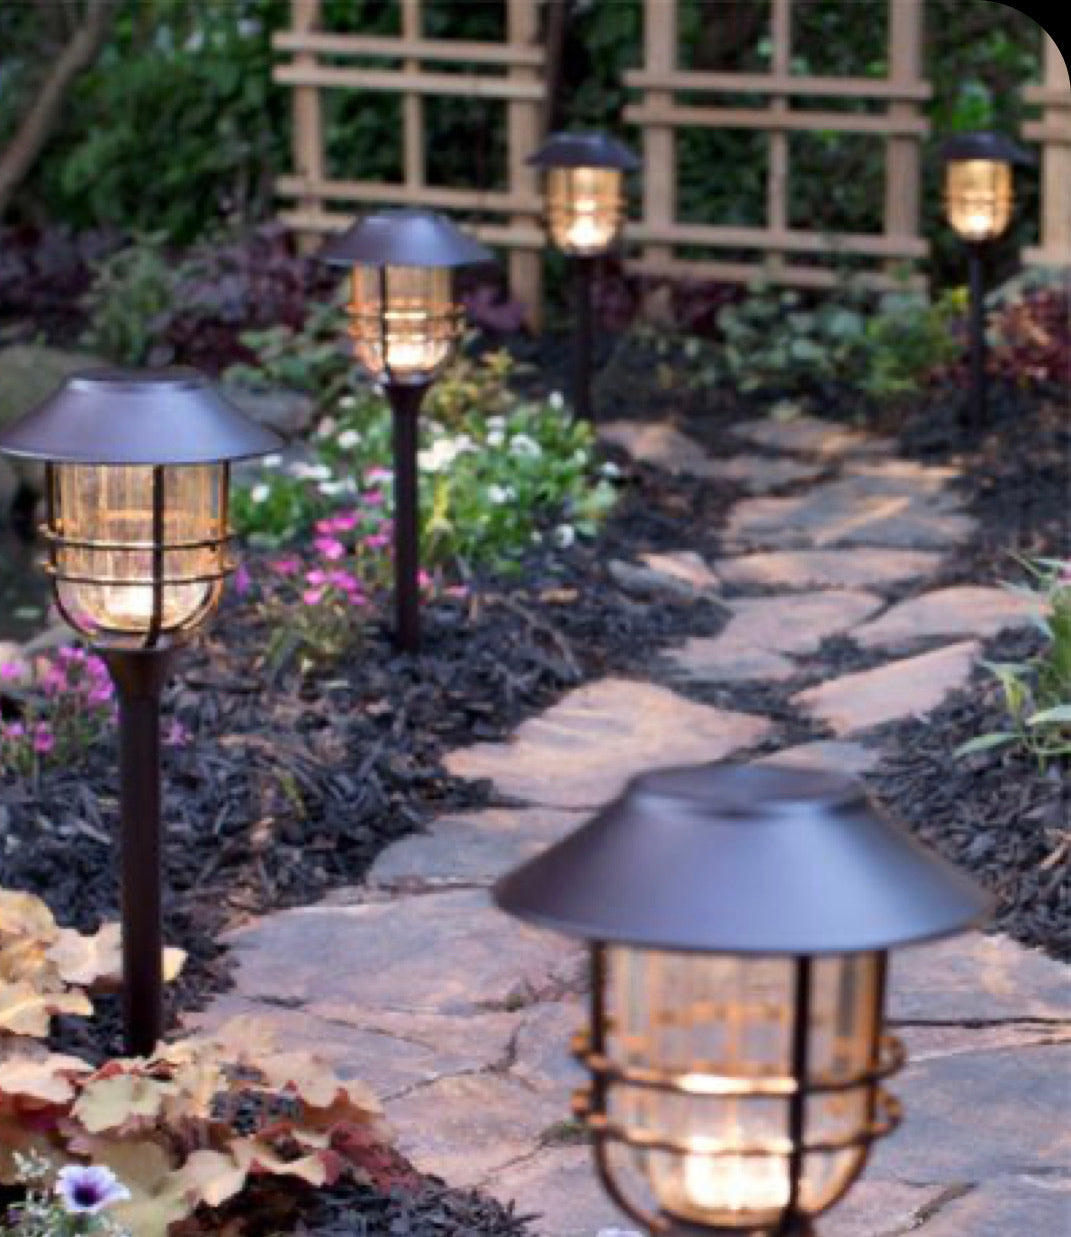 SmartYard Grill Solar LED Pathway Lights - Oil-rubbed Bronze 8 Pack